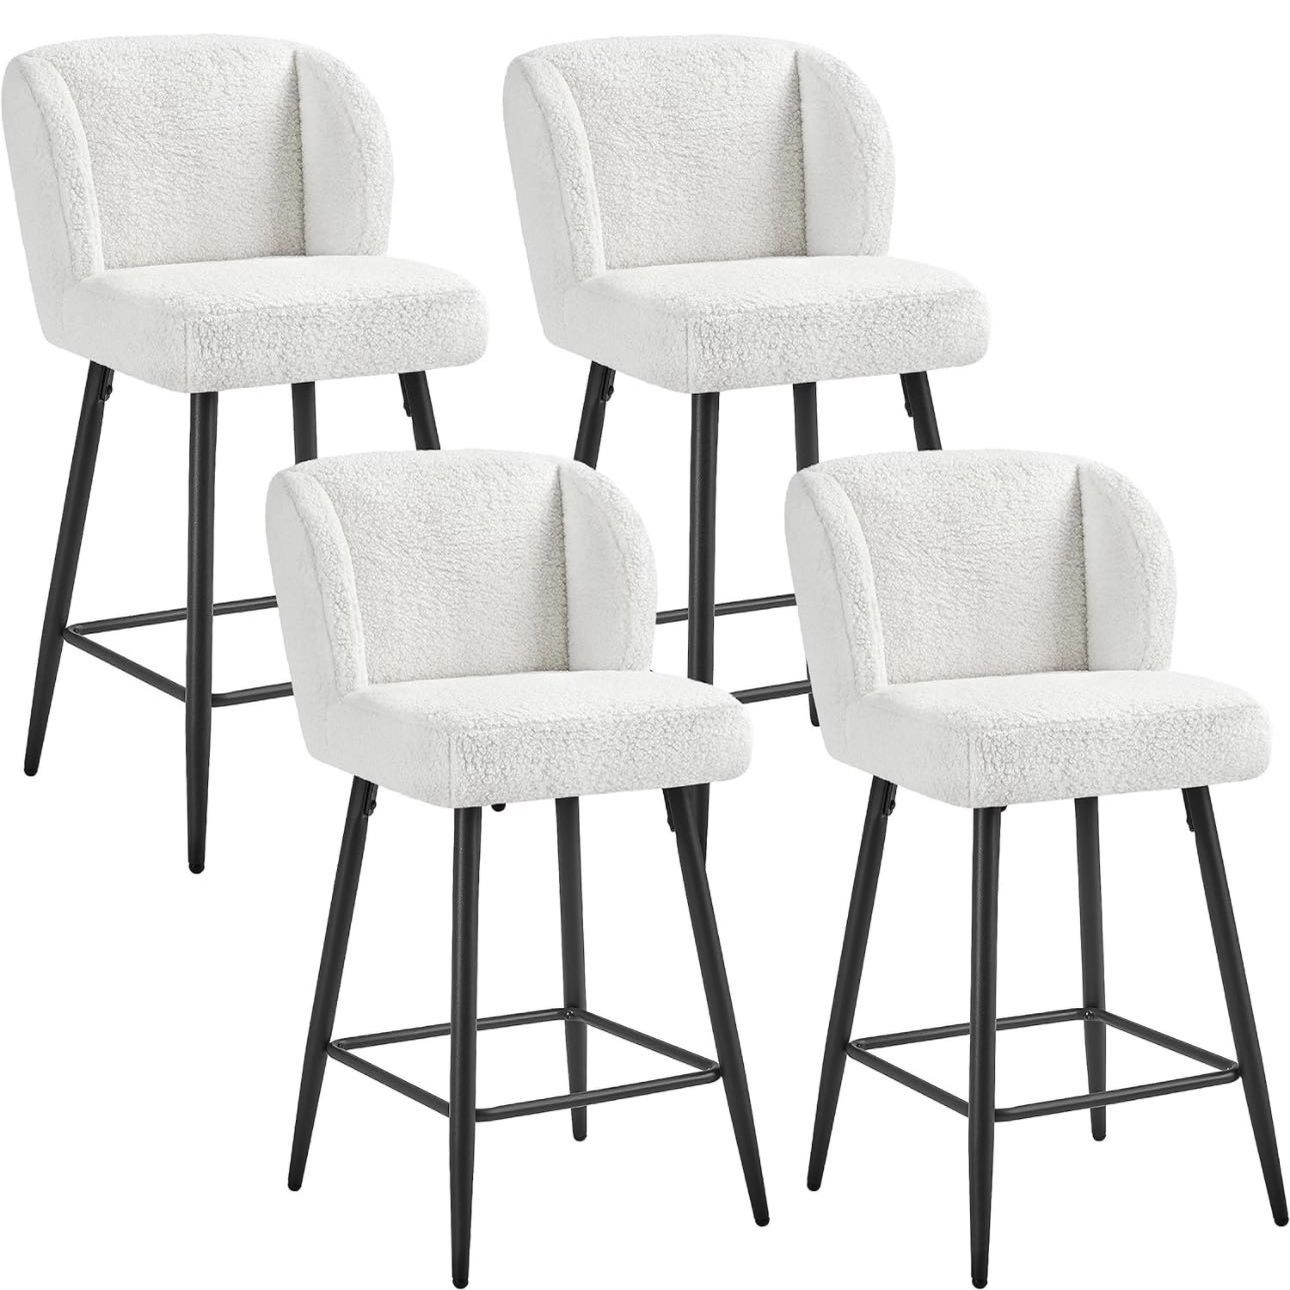 Bar Stools Set of 4 Boucle Fabric Upholstered Counter Height Stools Armless Kitchen Island Stools with Black Metal Legs for Pub Club Kitchen, White 61